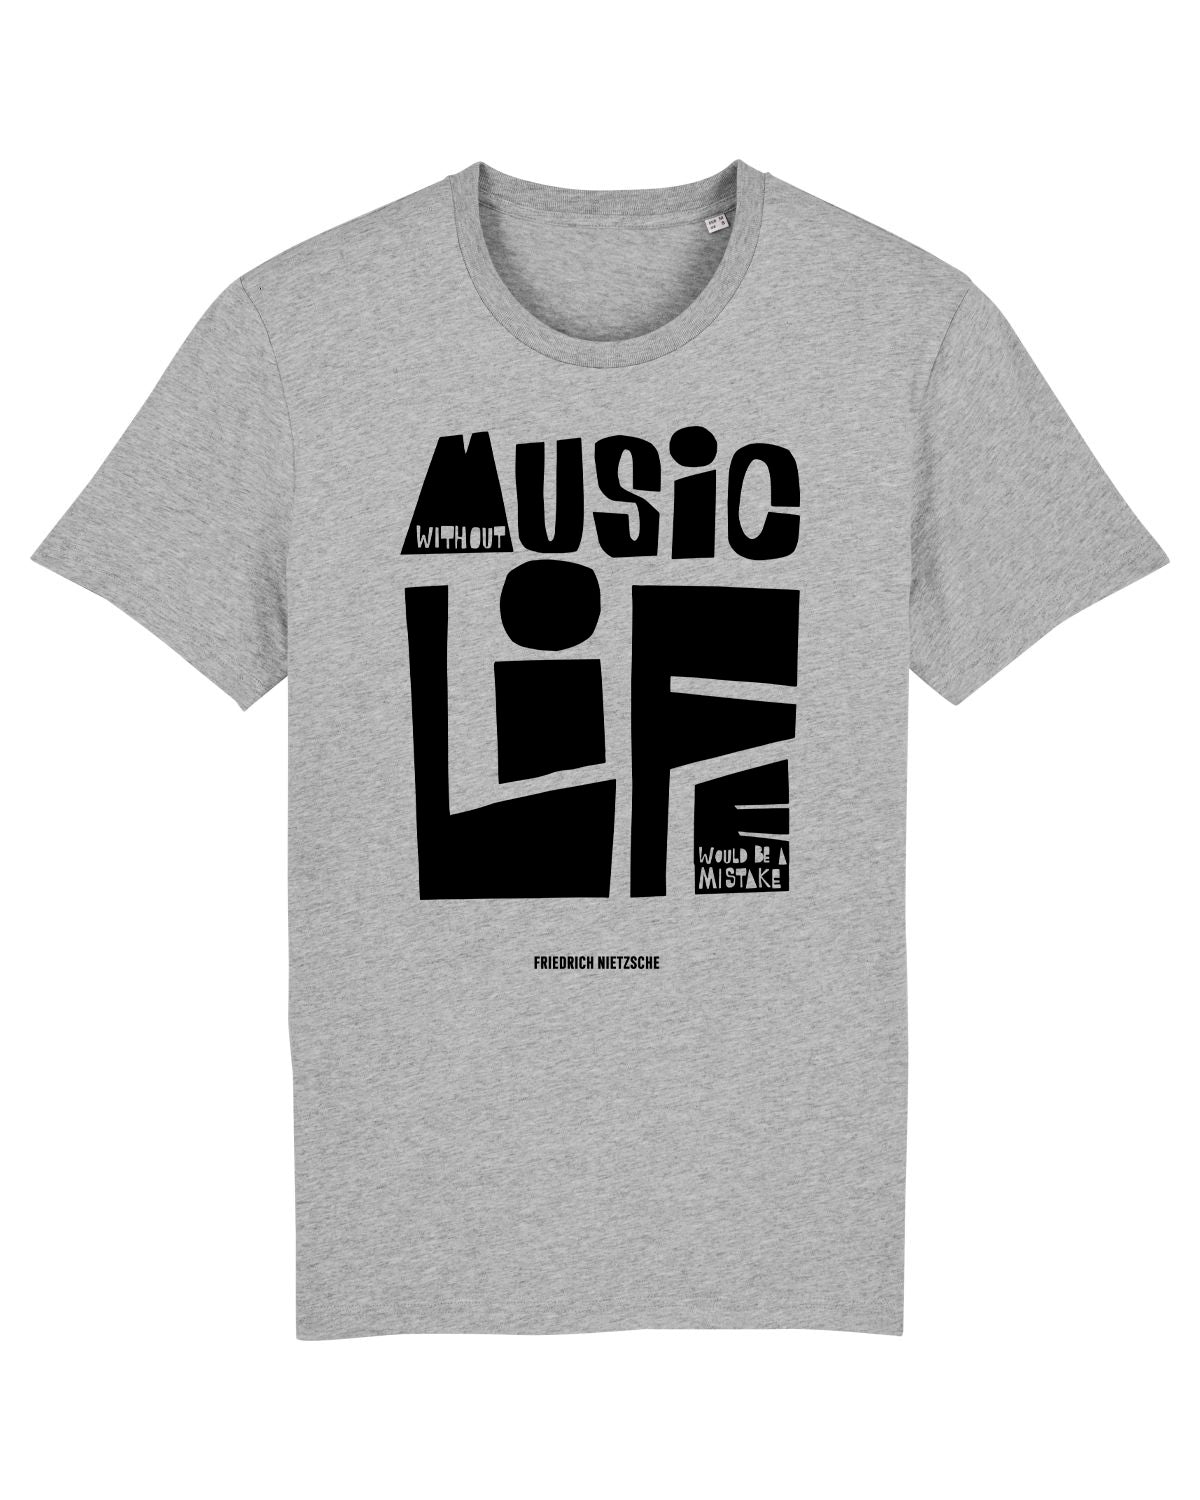 'Without Music Life Would Be A Mistake' Organic Unisex T-shirt